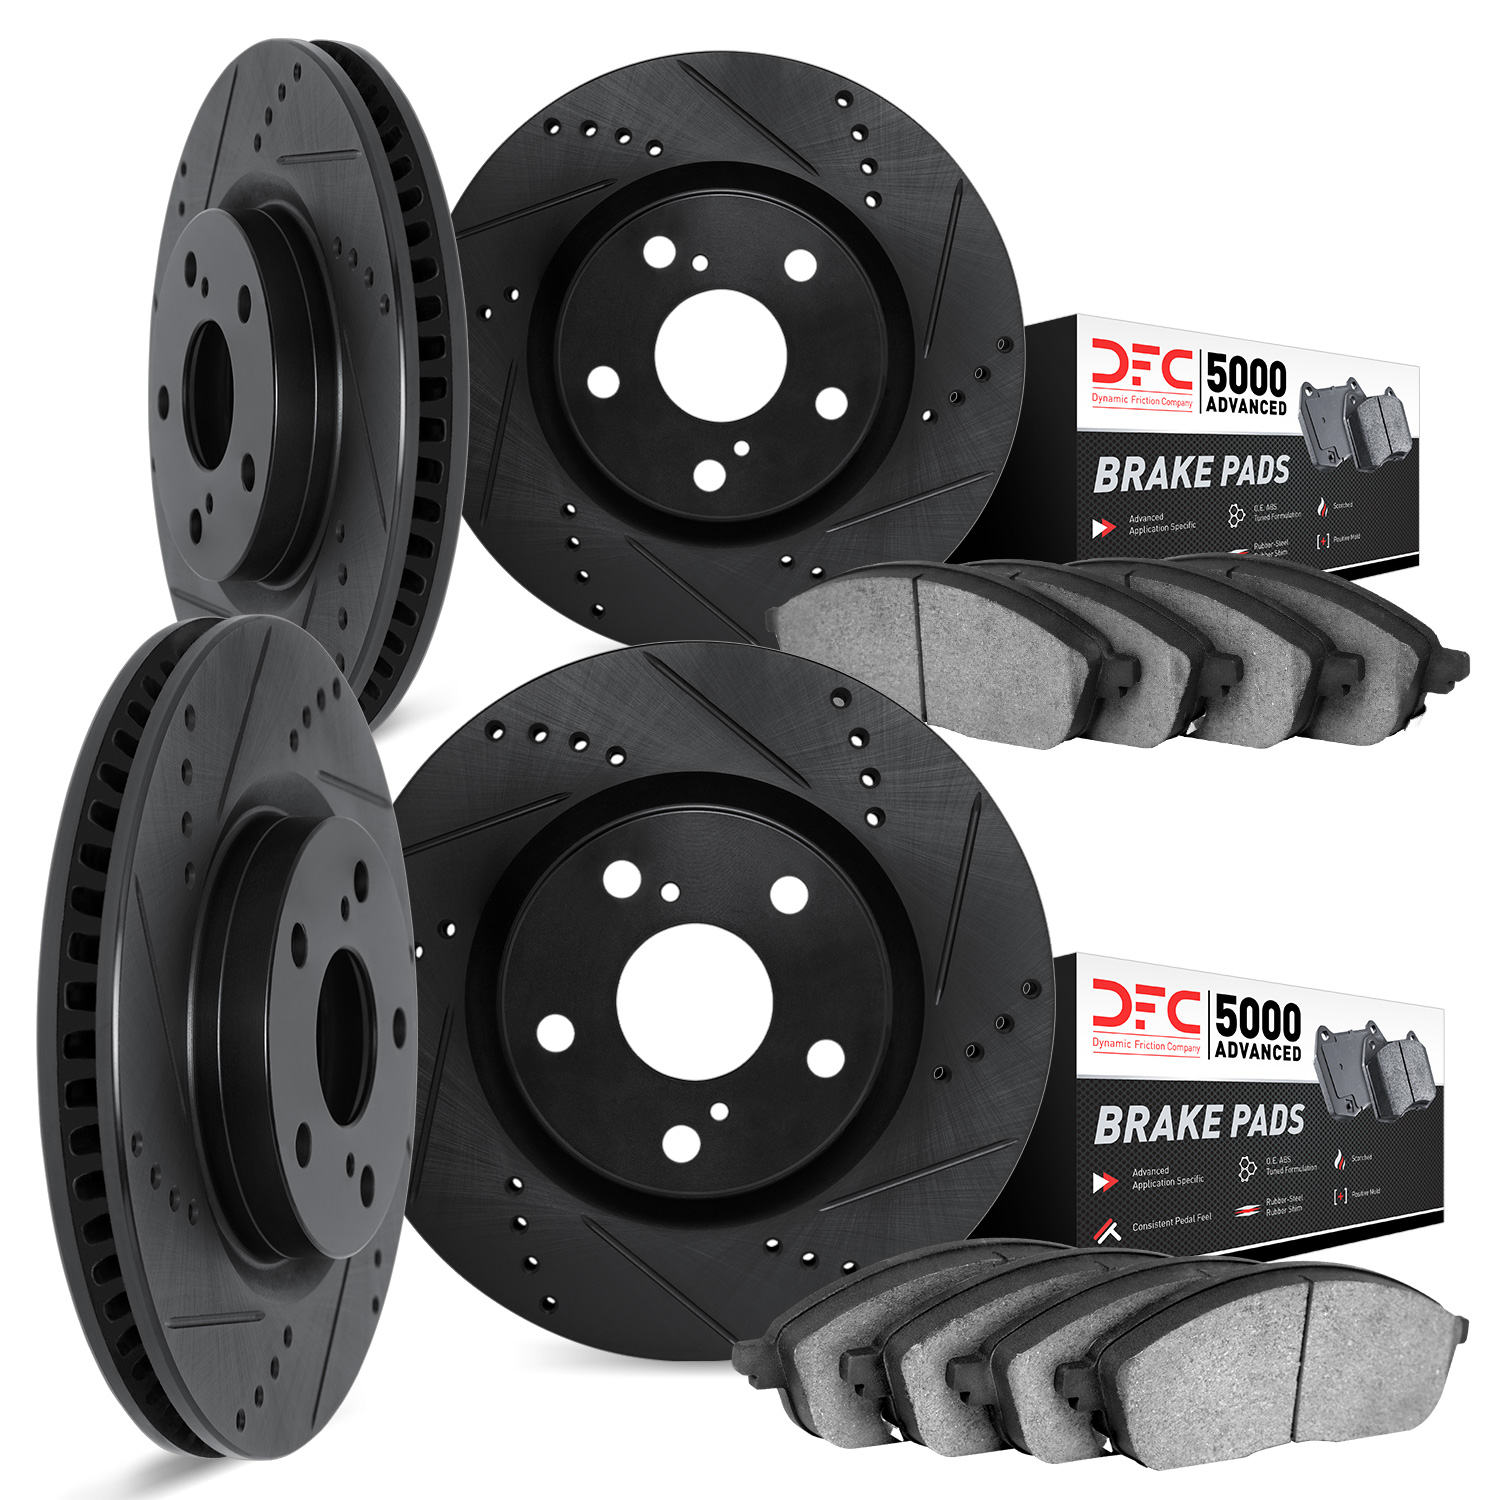 8504-31022 Drilled/Slotted Brake Rotors w/5000 Advanced Brake Pads Kit [Black], 2008-2011 BMW, Position: Front and Rear